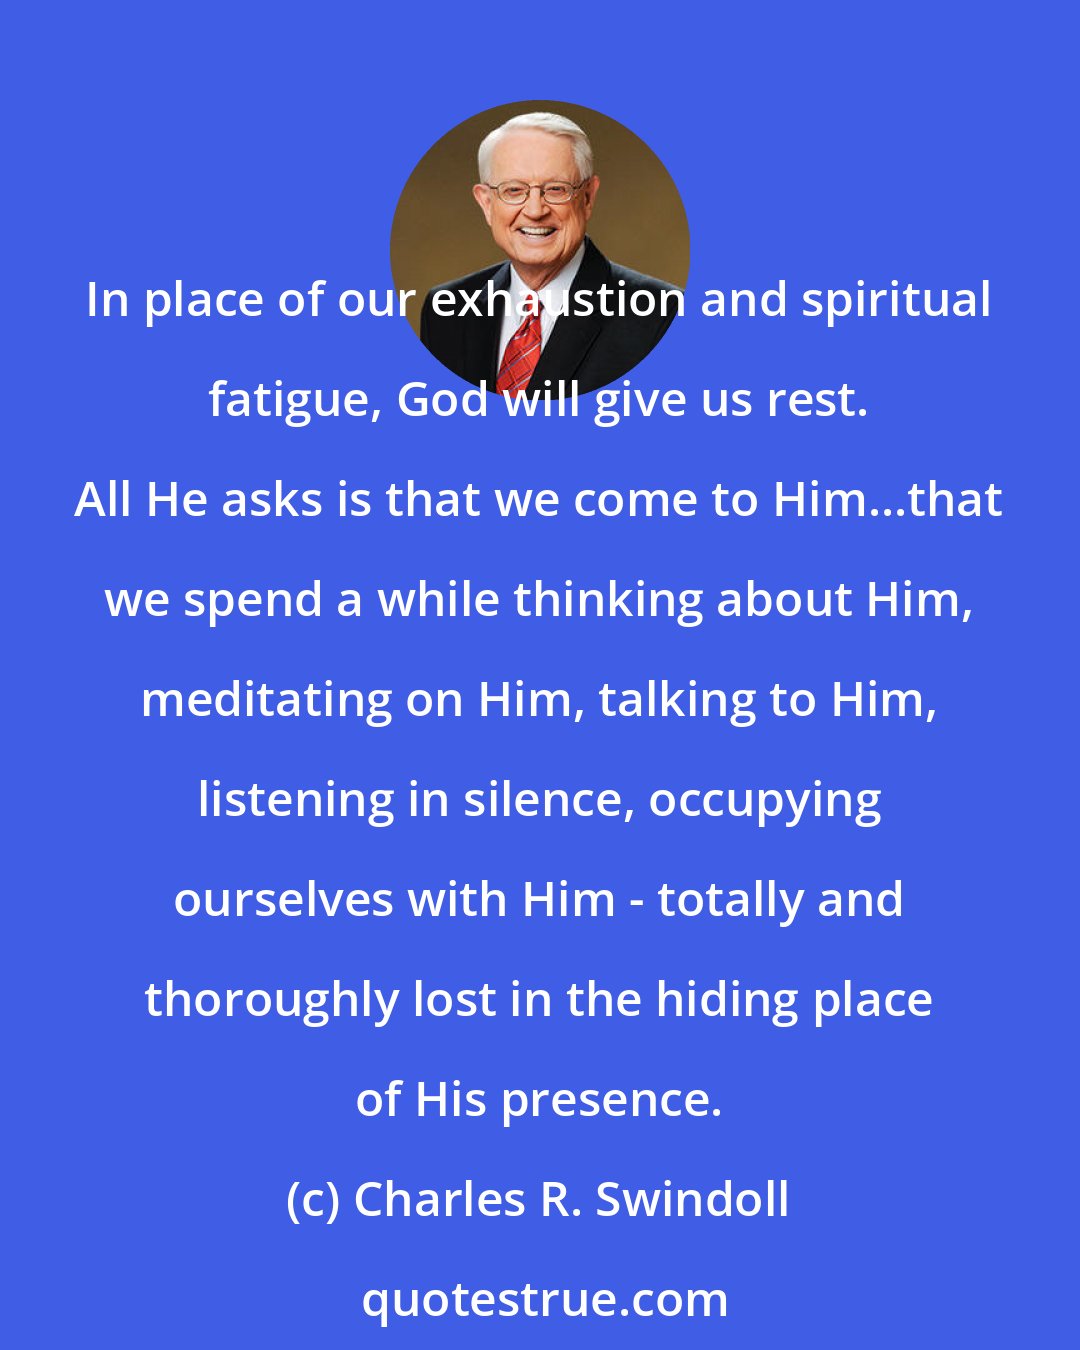 Charles R. Swindoll: In place of our exhaustion and spiritual fatigue, God will give us rest. All He asks is that we come to Him...that we spend a while thinking about Him, meditating on Him, talking to Him, listening in silence, occupying ourselves with Him - totally and thoroughly lost in the hiding place of His presence.